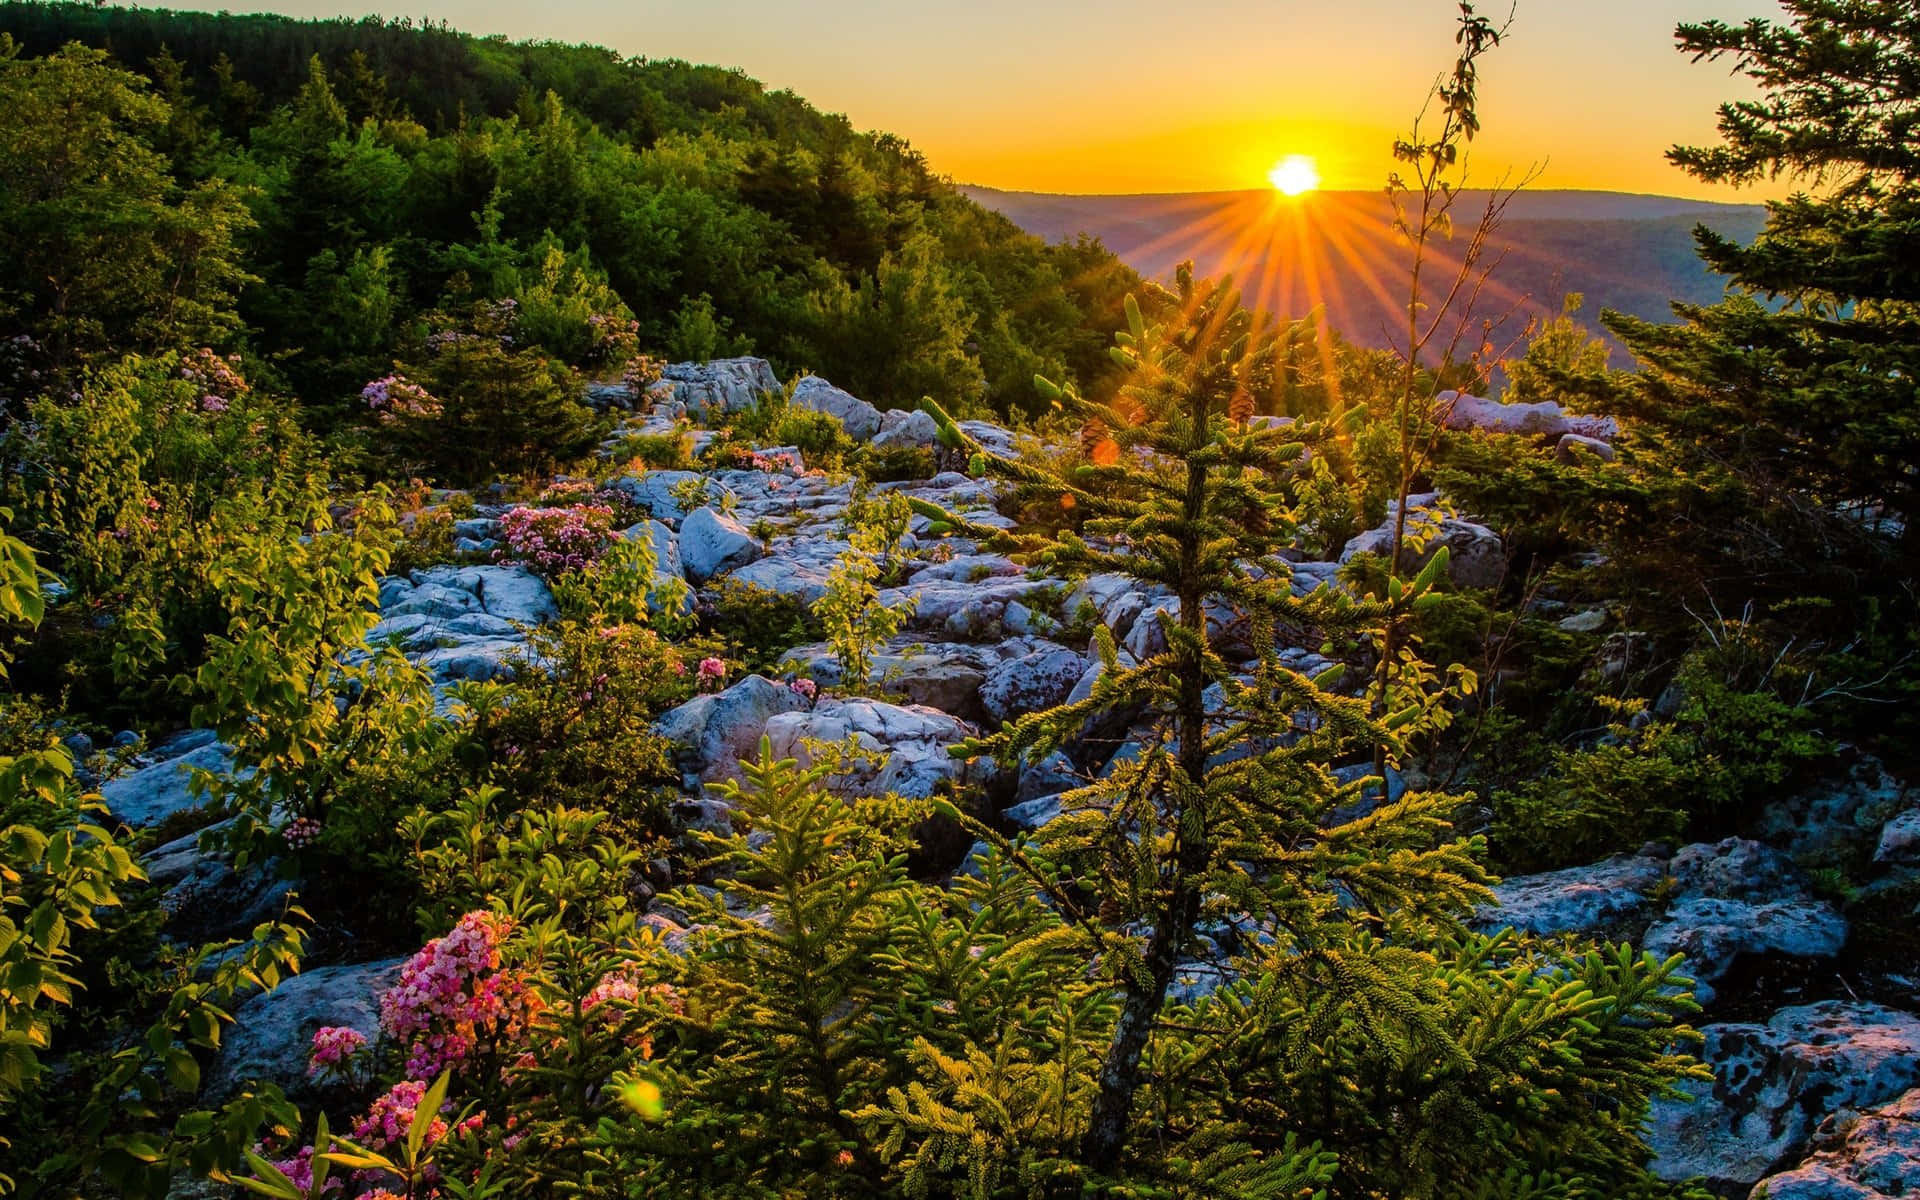 A Sunrise Over A Rocky Mountain With Flowers